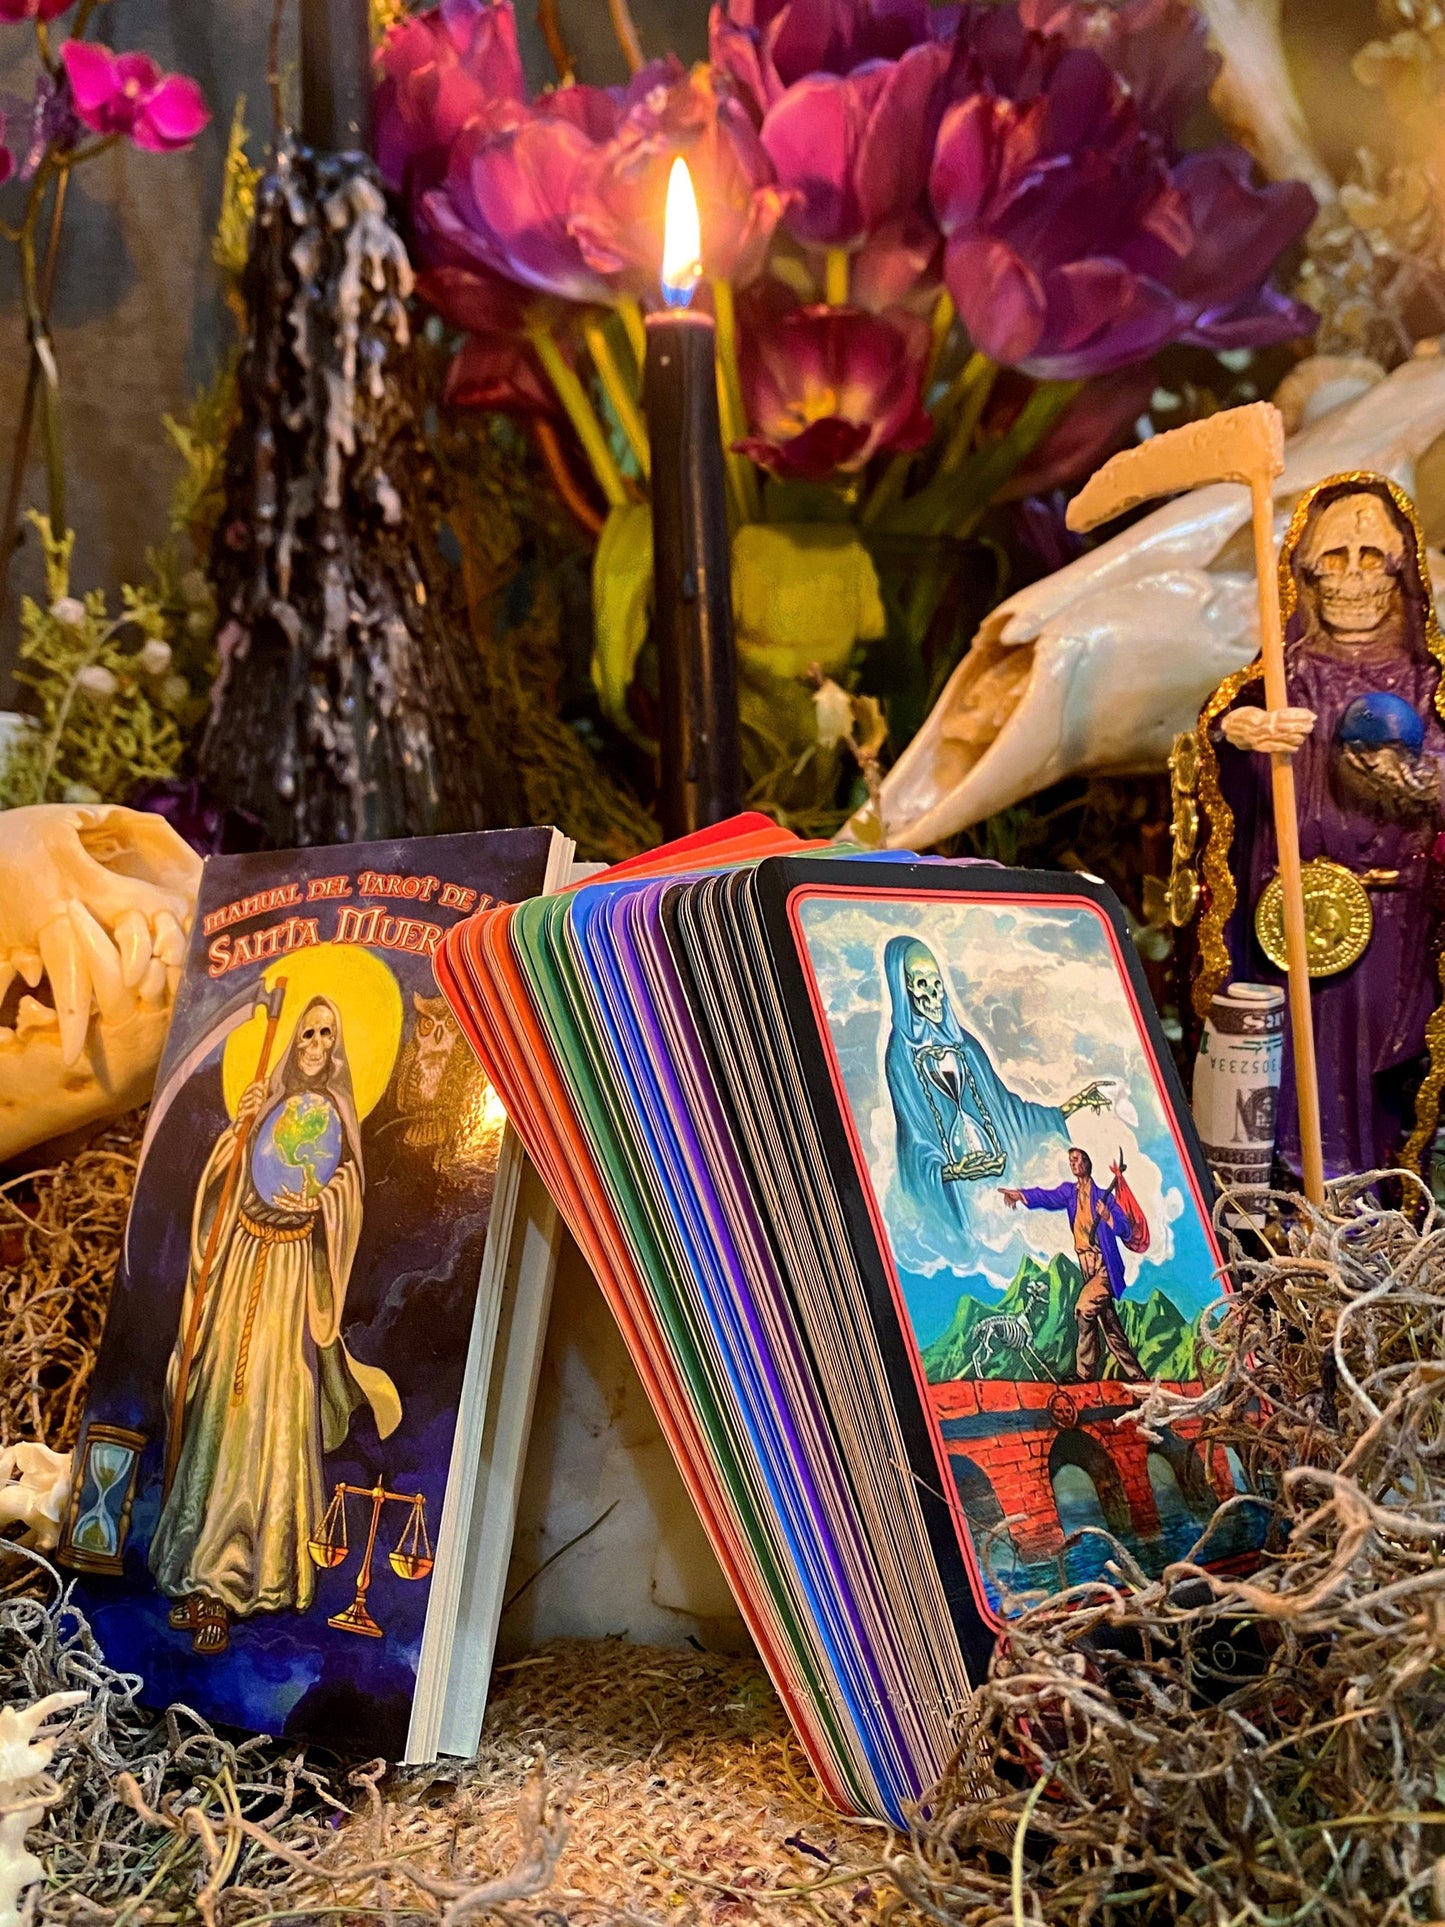 Tarot de la Santa Muerte + Blessed + Booklet & Cards + From Mexico (Spanish Edition) + New